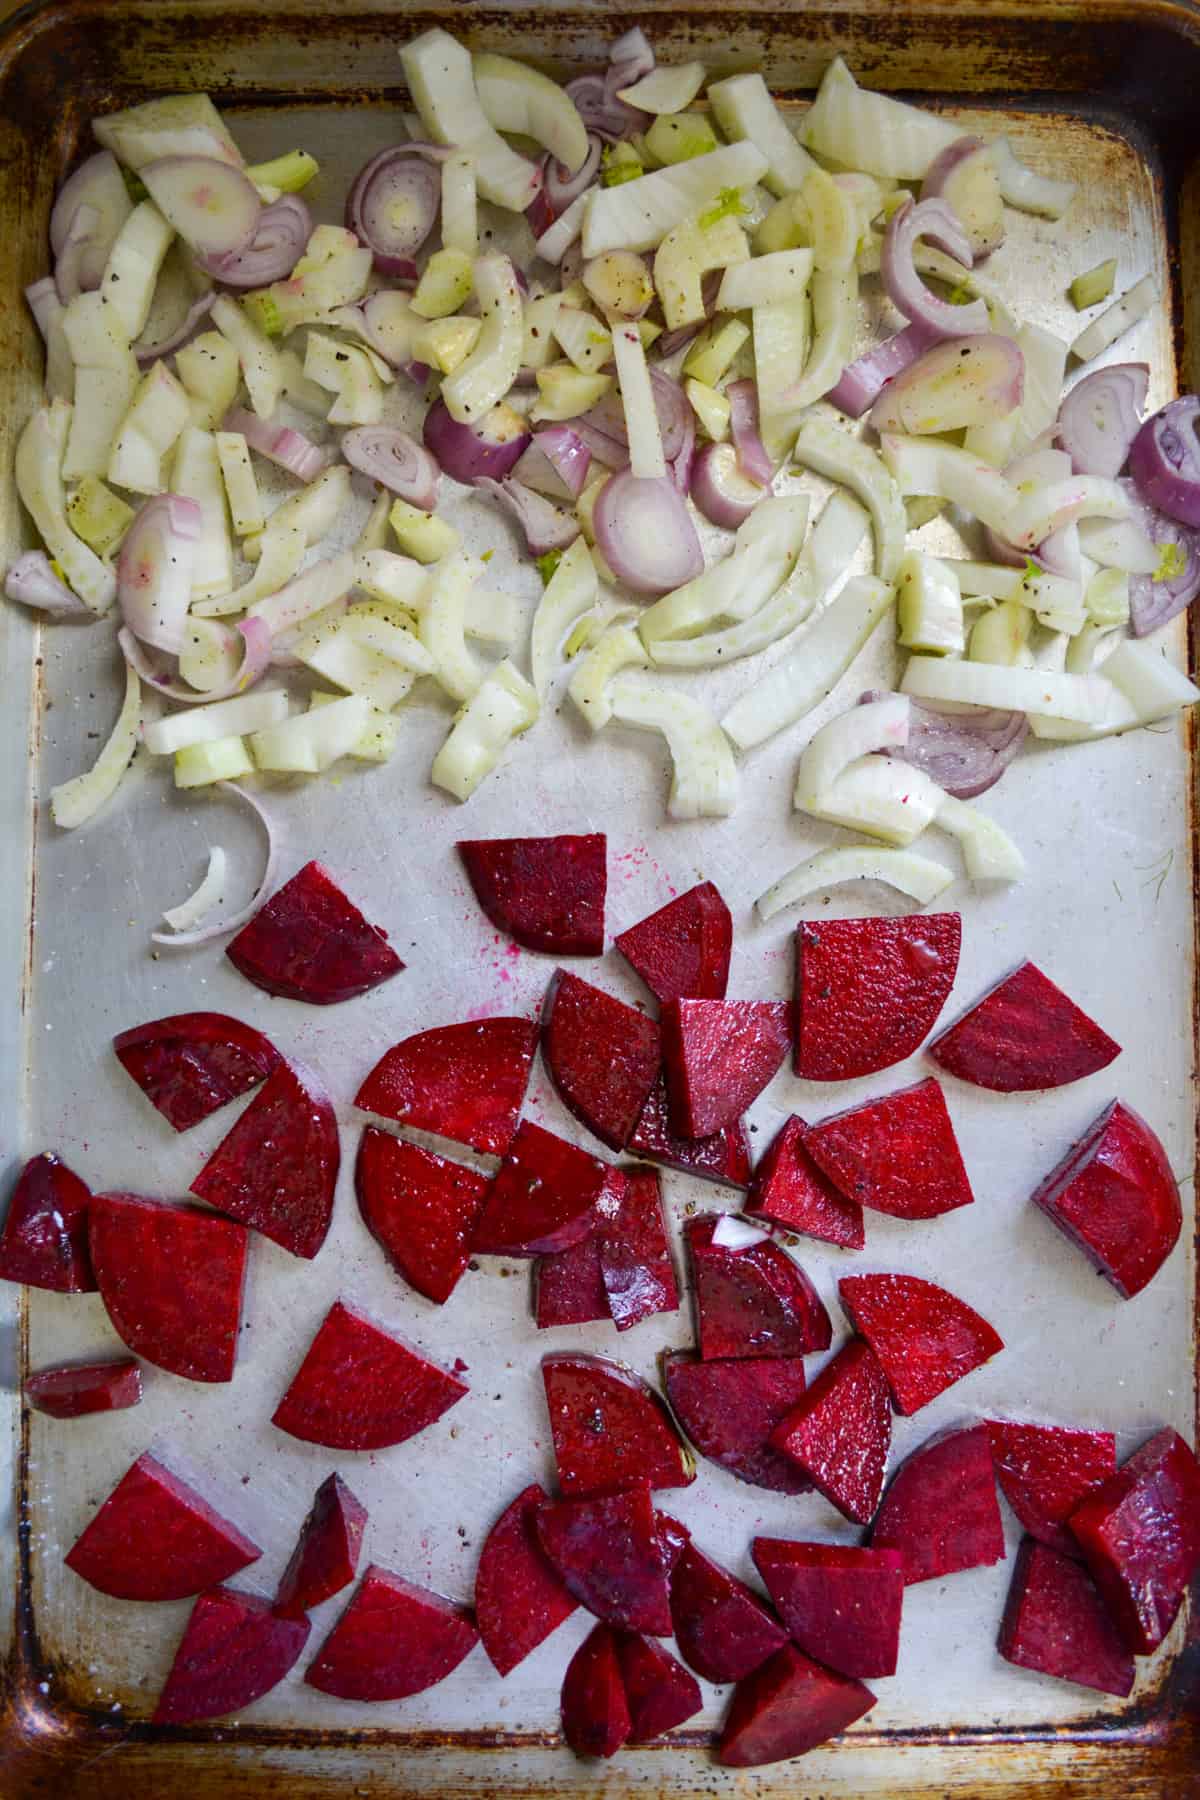 Sliced beets, fennel and shallot on a baking sheet.